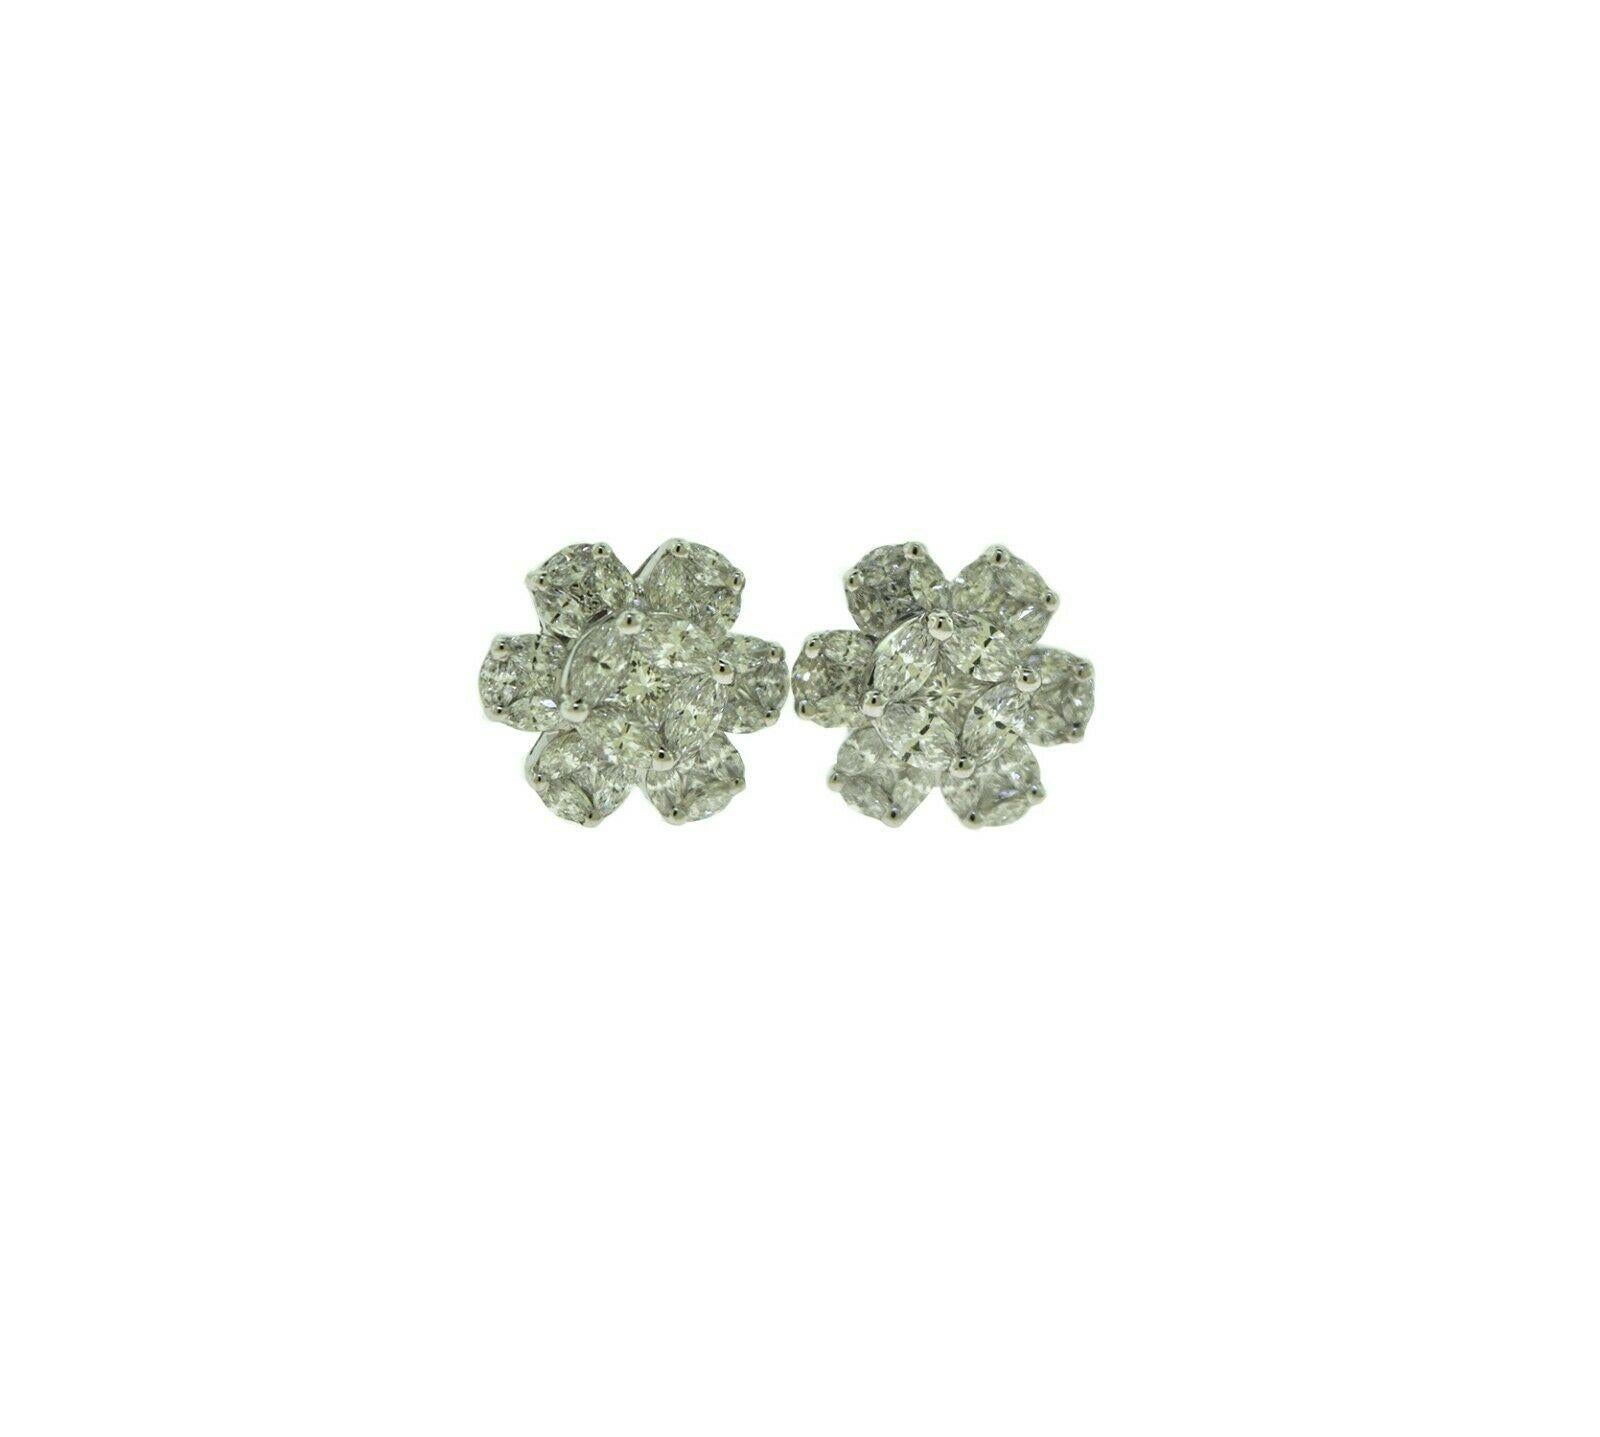 Marquise Cut Flower Cluster Diamond Optical Illusion Earring Studs in 18 Karat White Gold